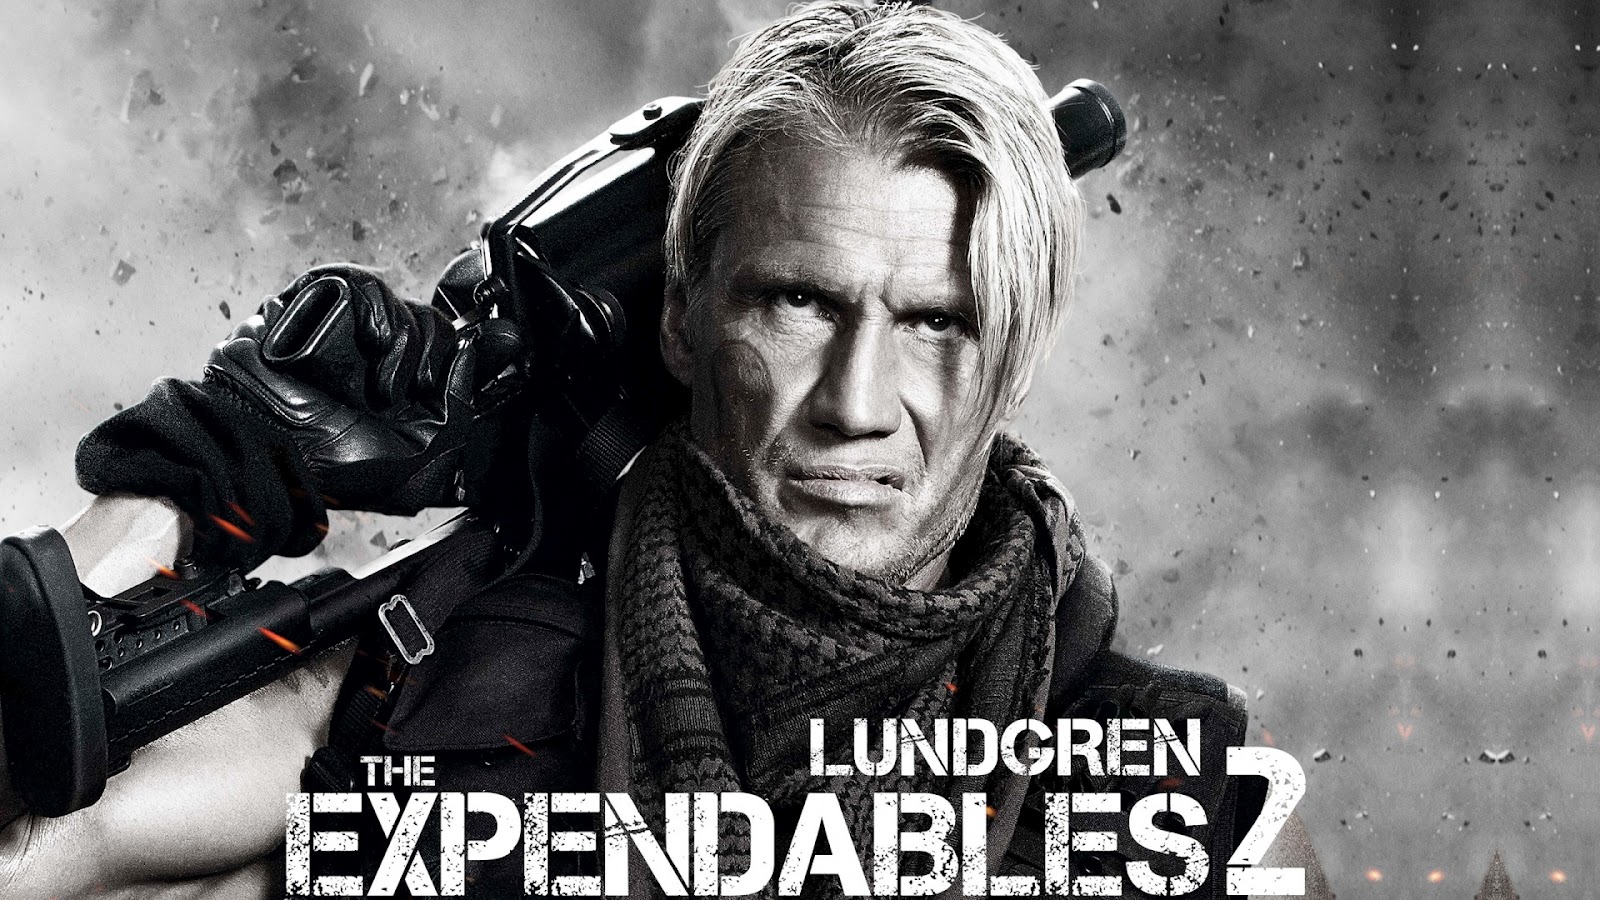 ... +expendables+2+hd+wallpapers+%283%29 The Expendables 2 HD Wallpapers